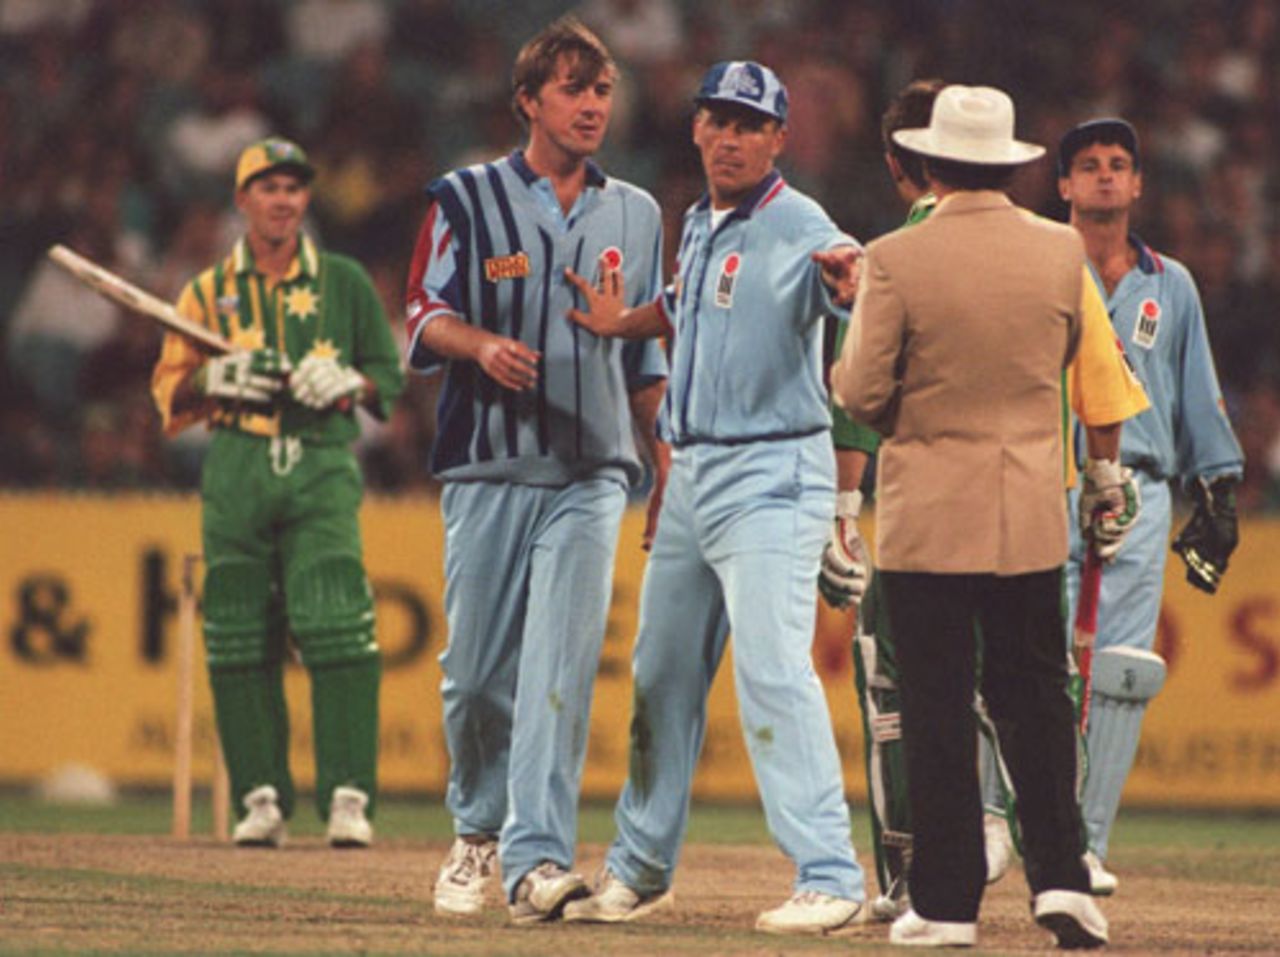 Alec Stewart steps in to prevent any argument between Phil Tufnell and umpire Tony McQuillan, Australia v England, MCG, December 13, 1994